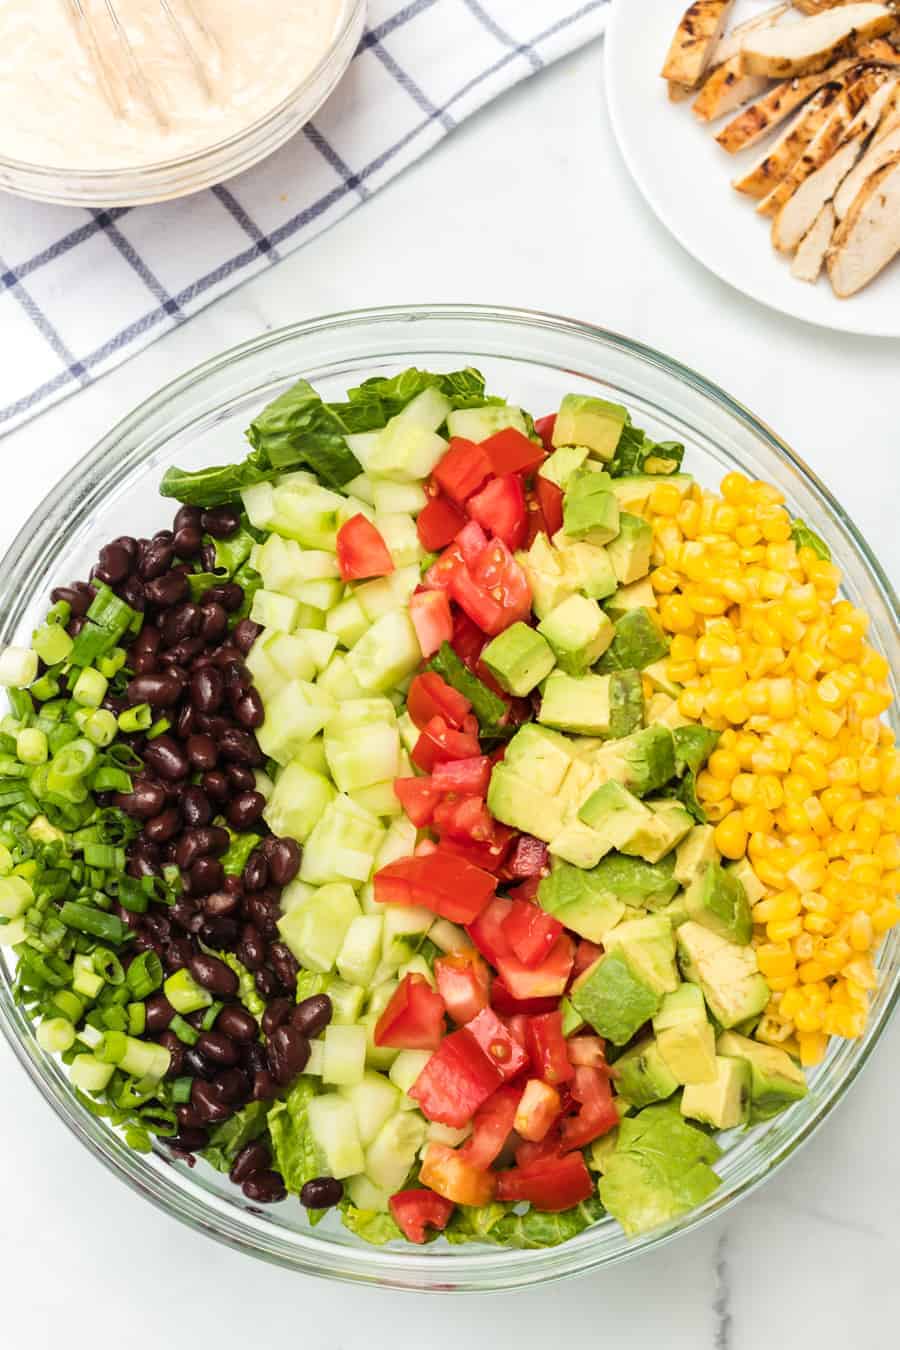 Barbecue ranch chicken salad is the most flavorful salad you'll ever eat, complete with a smoky and sweet dressing, grilled chicken, avocado, tomato, corn, romaine, and a whole lot of other vibrant veggies.